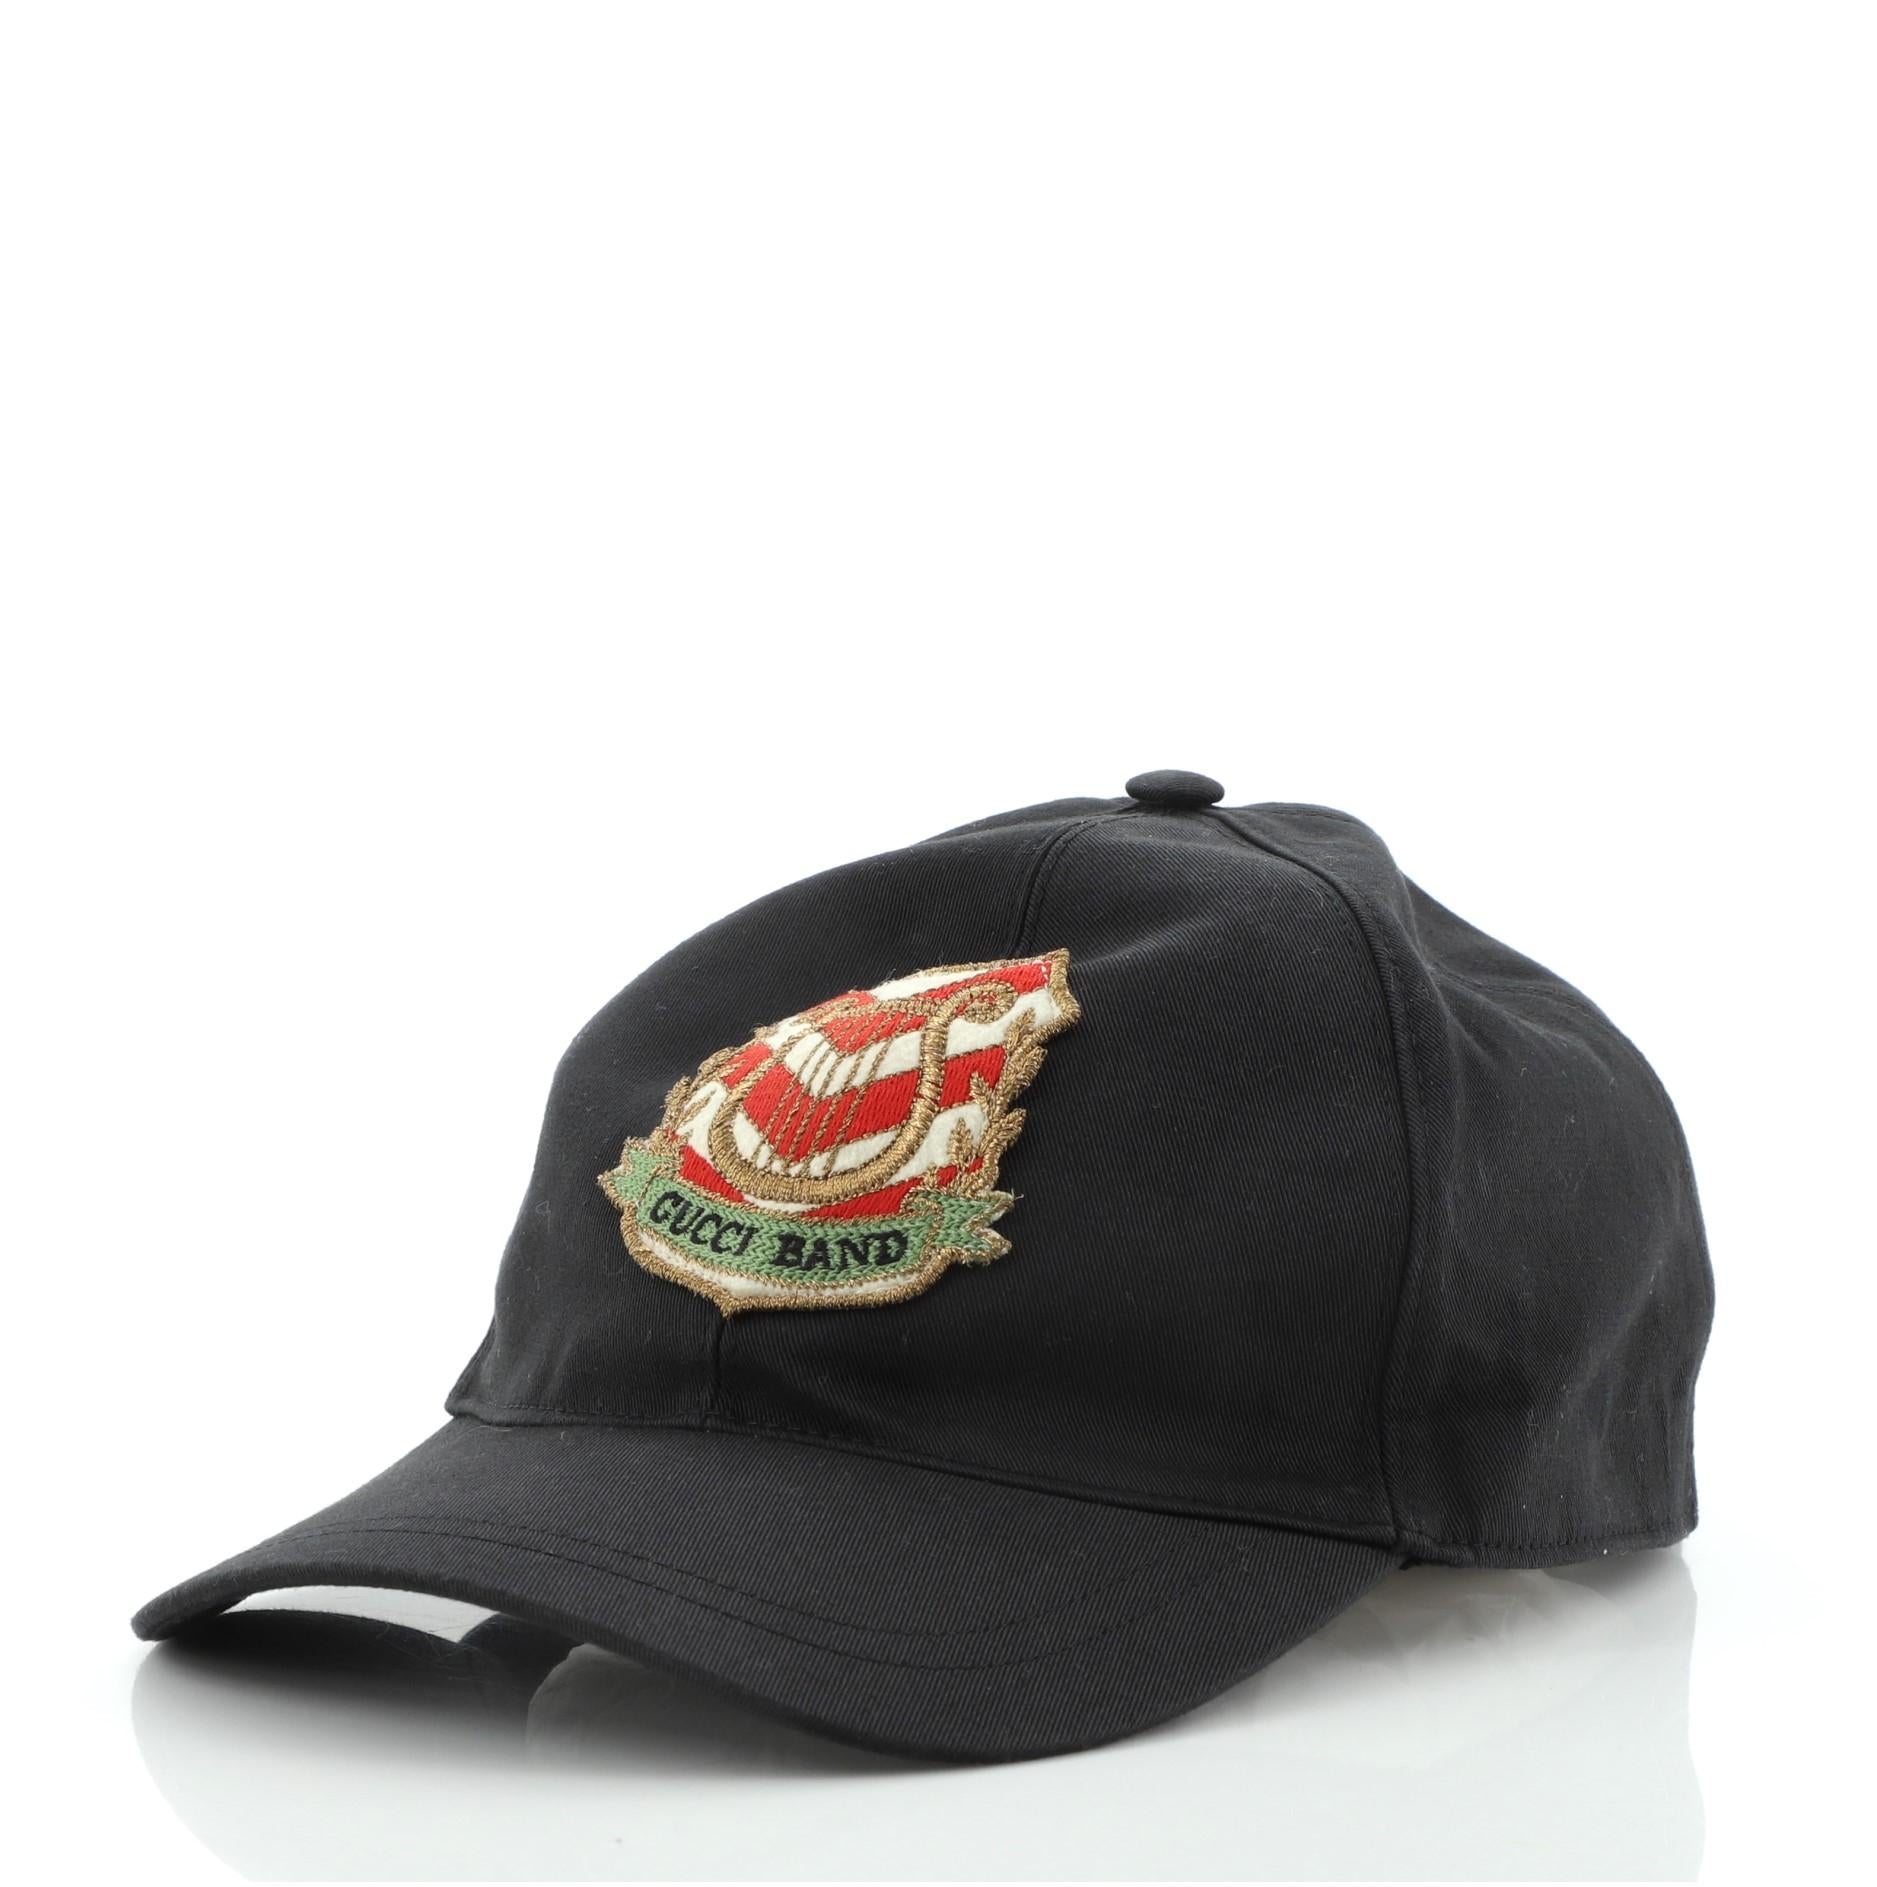 Gucci Band Patch Hat Fabric
Black Fabrin

Condition Details: Creasing and minor wear on exterior and in interior.

50623MSC

Height 